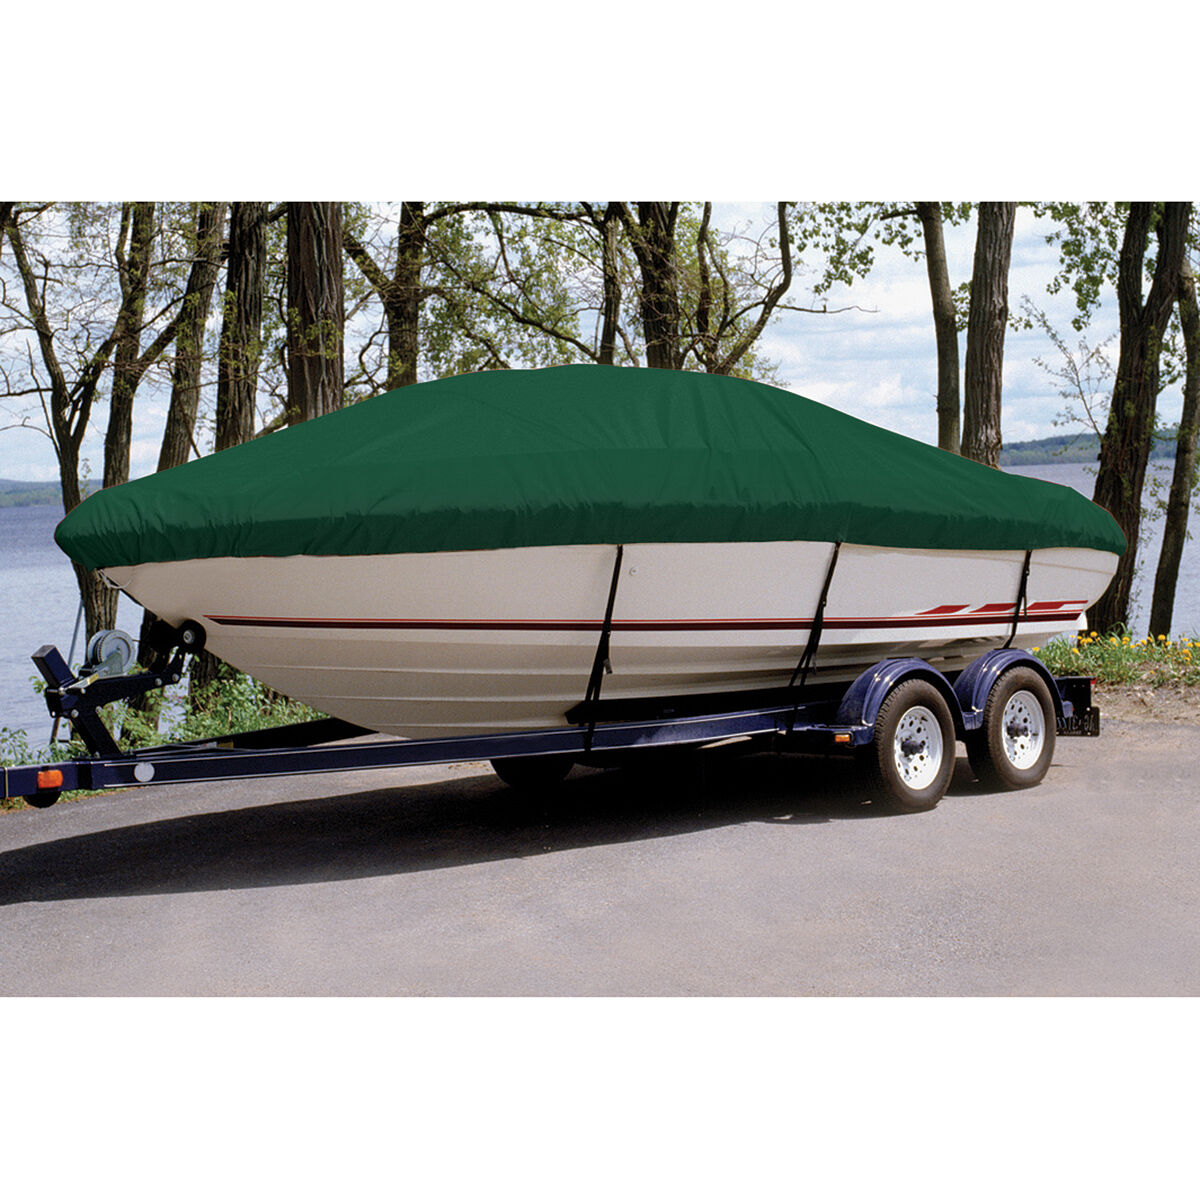 Taylor Trailerite Ultima Cover for 08-12 Lund 1625 Rebel XL SS PTM O/B in Green